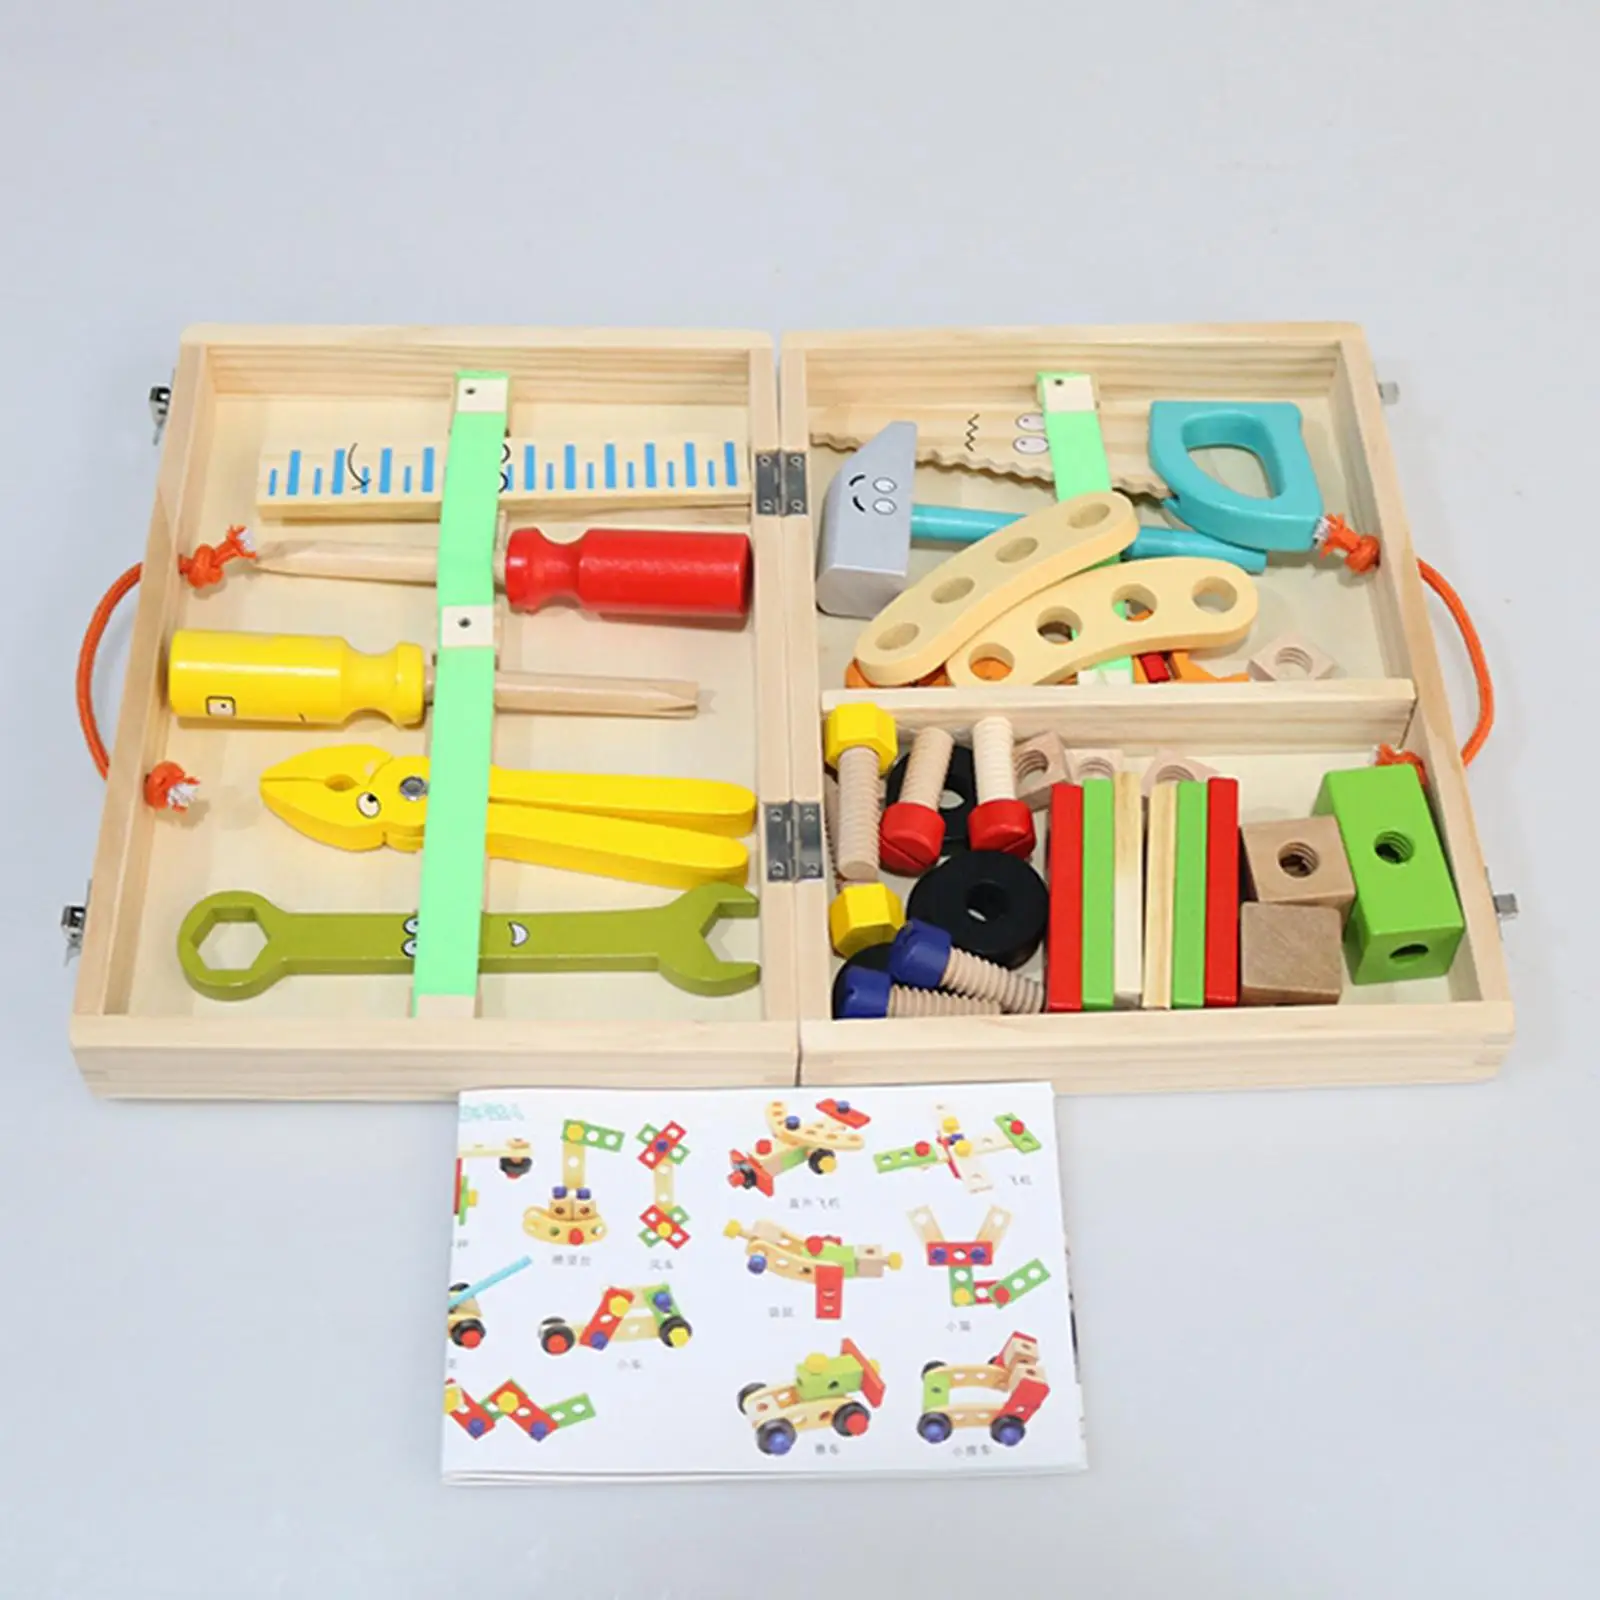 Wooden Repair Tools Box for Kids Educational  Assembly Games